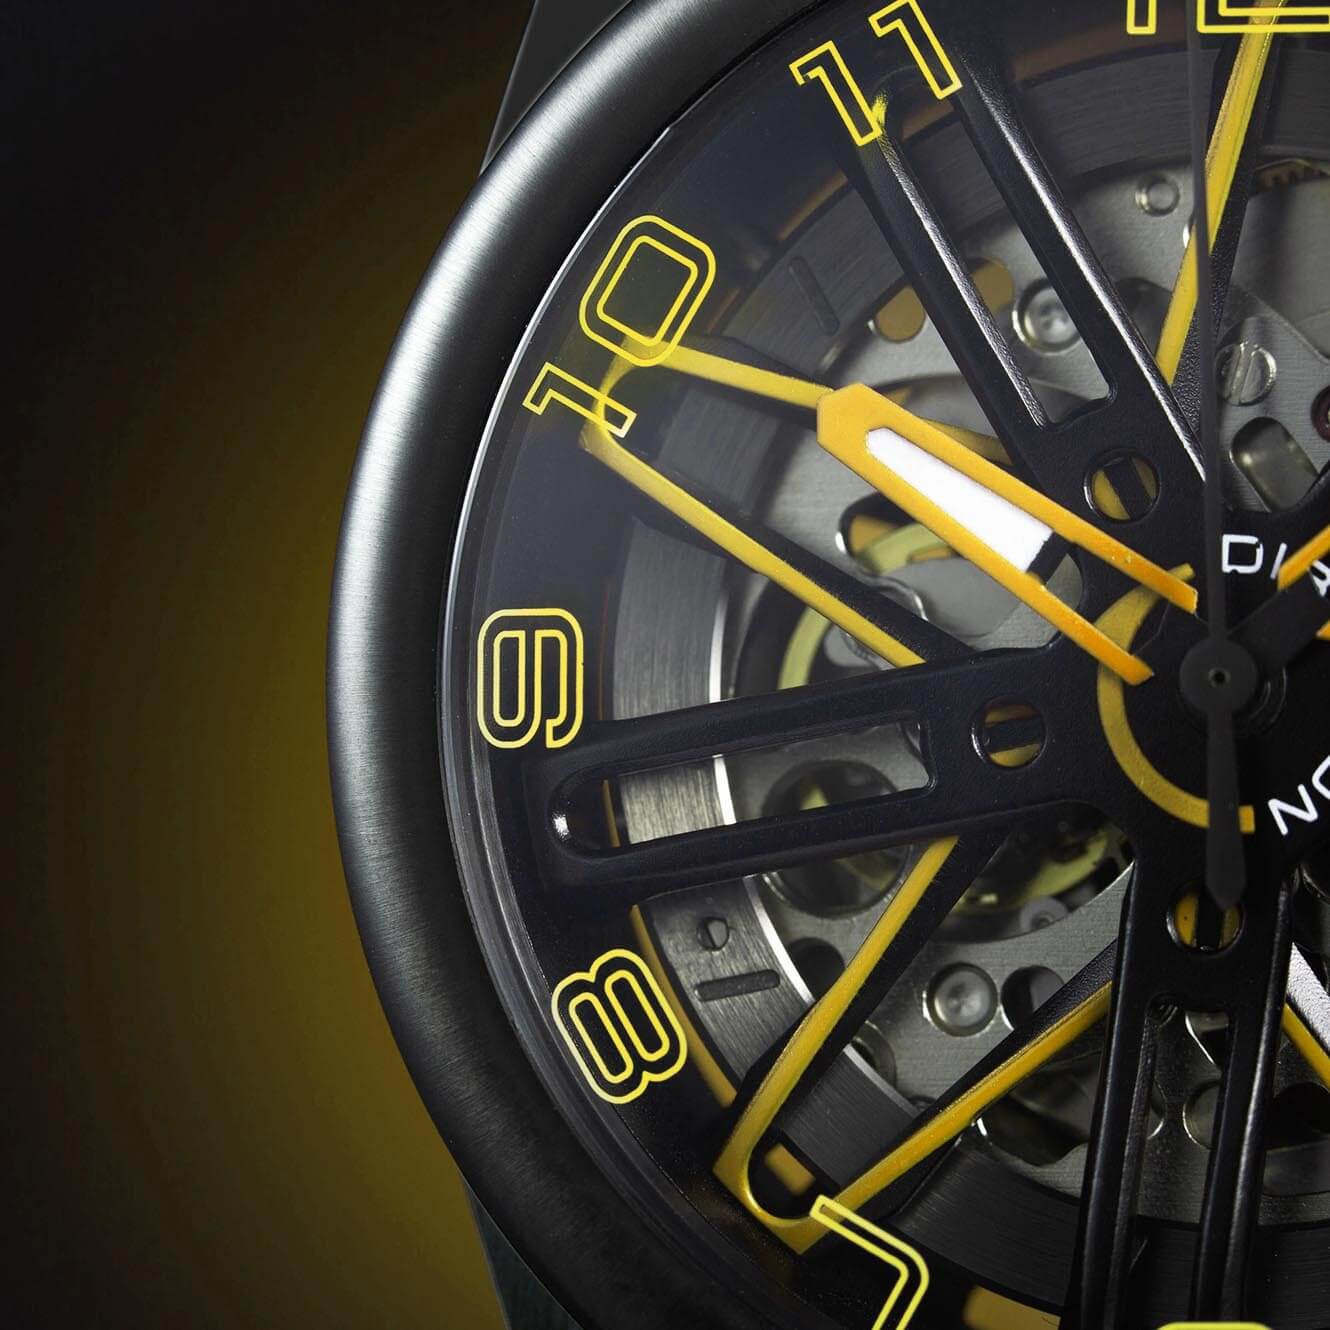 RIM GT Ø42mm in black and yellow | Mens Luxury Watches | Italian Designed Watches